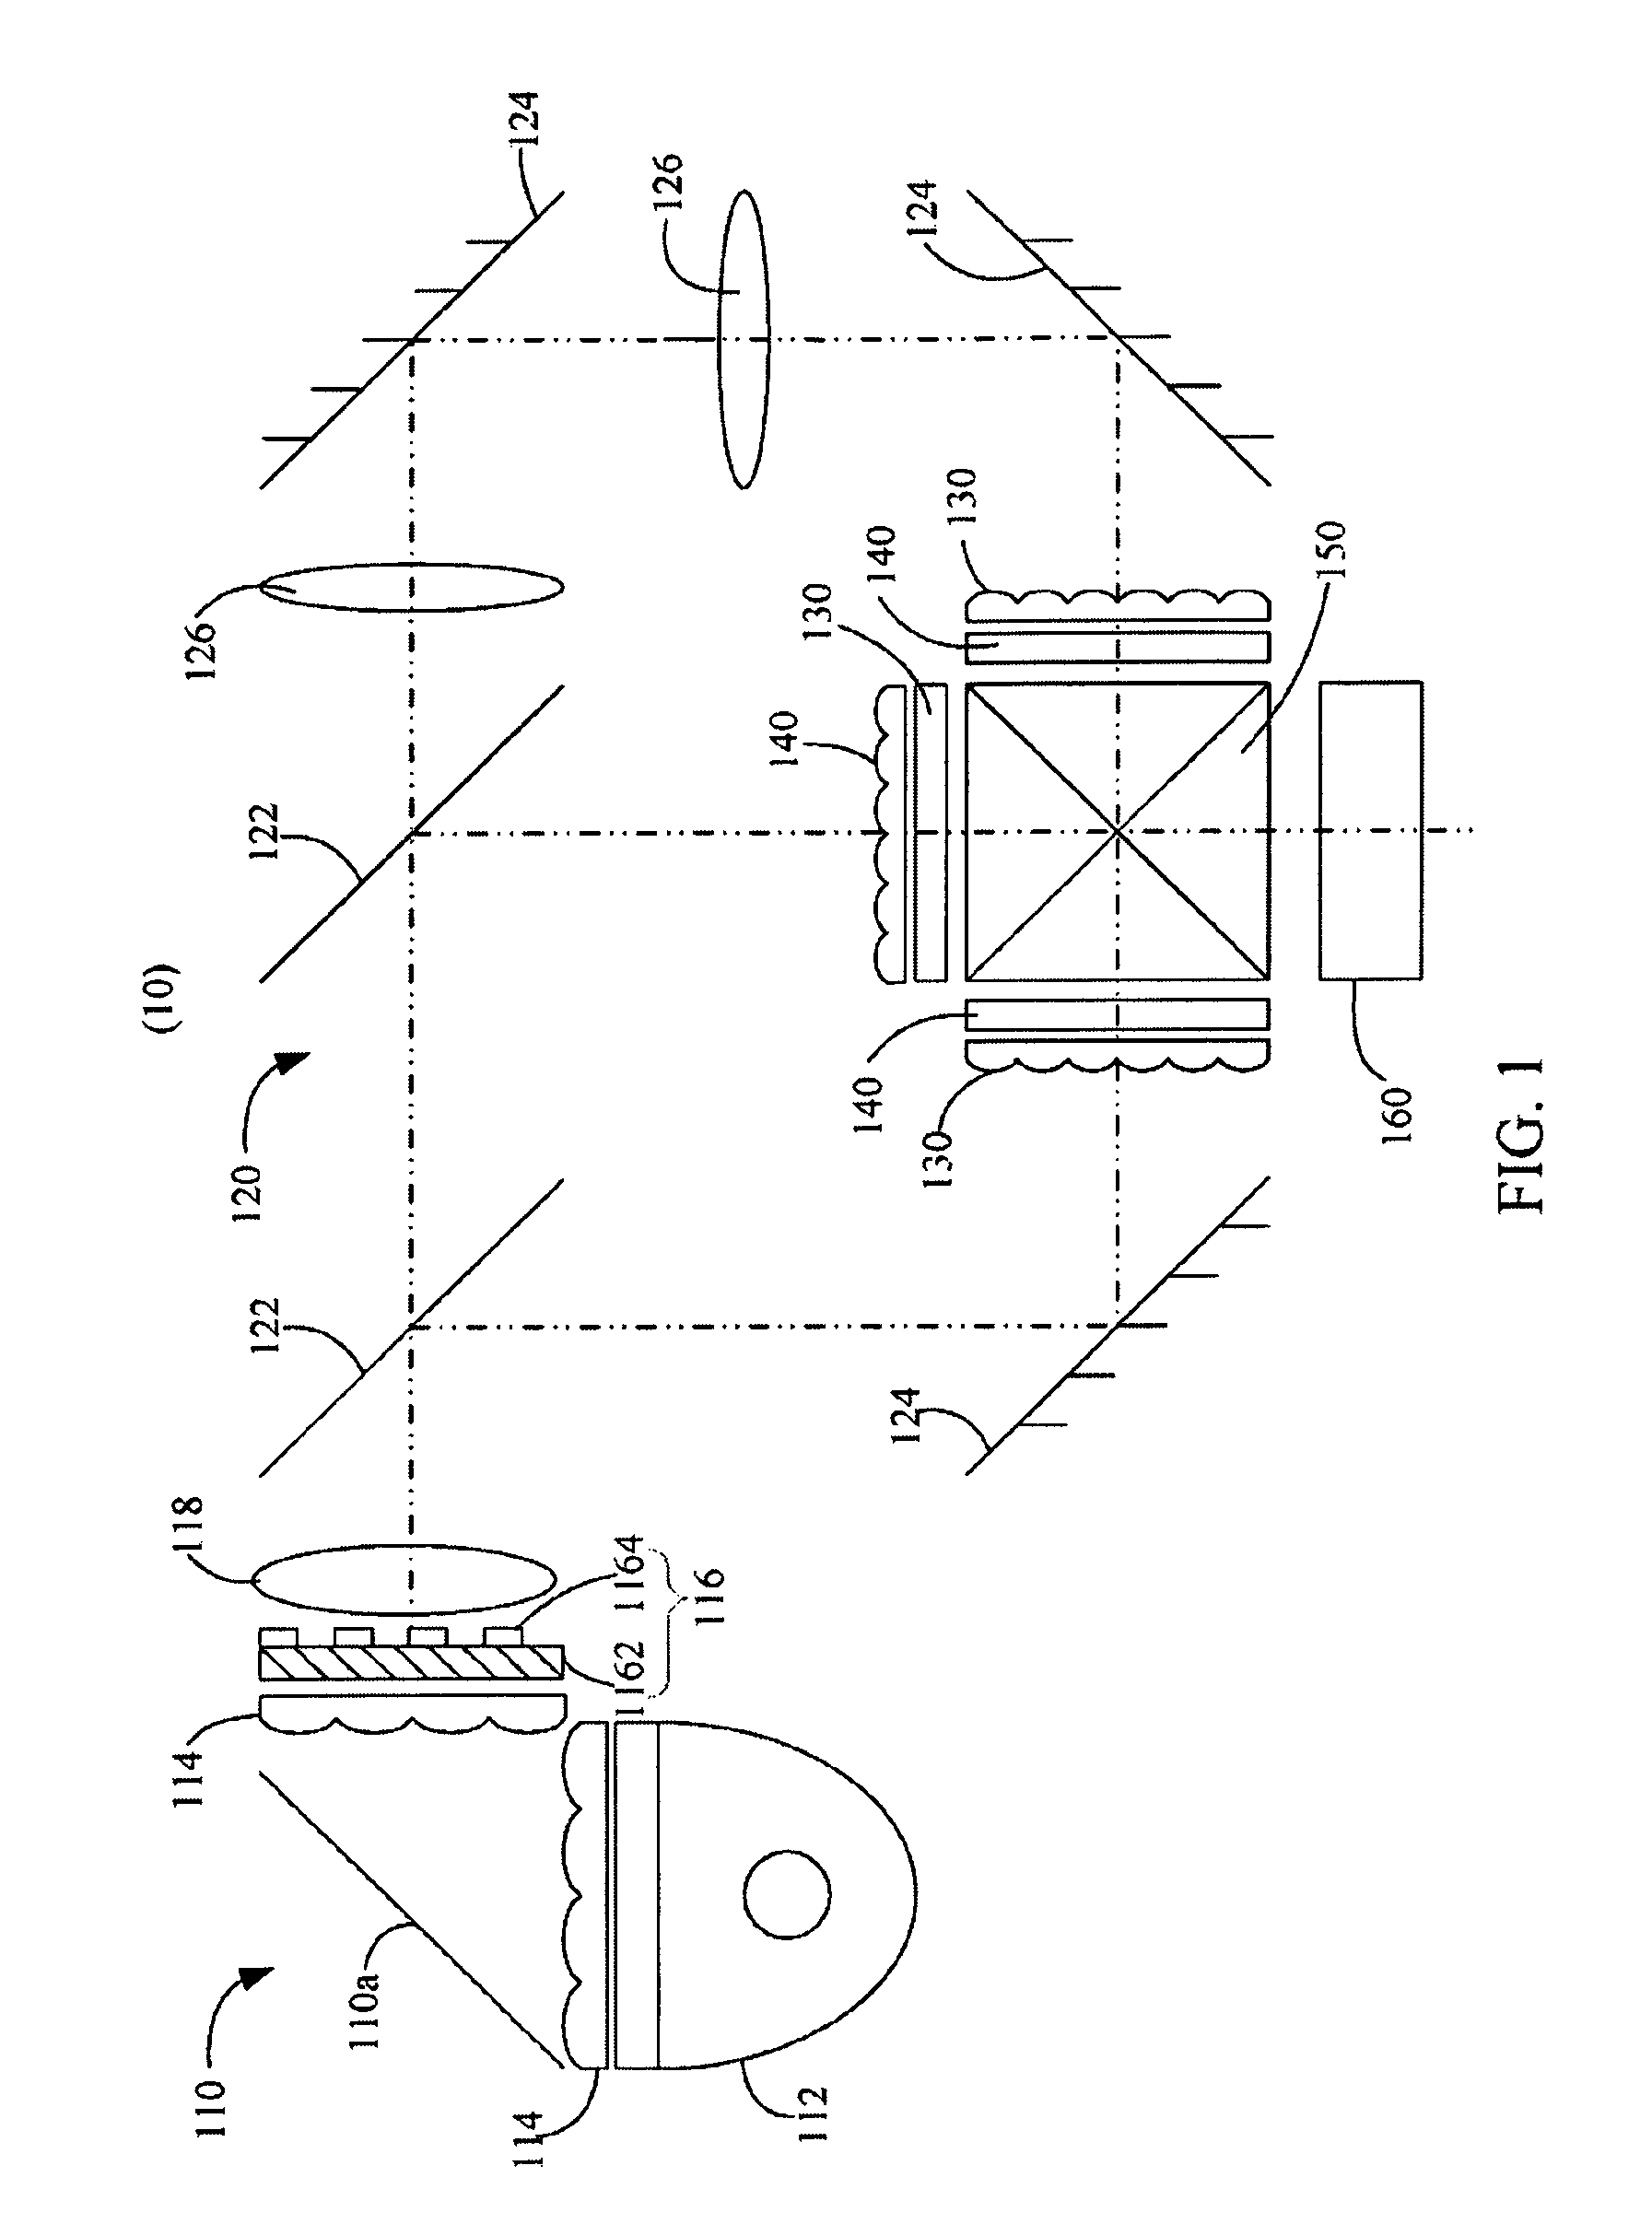 Micro lens array unit having at least one of first and second micro lens arrays movable for changing the effective focal length of the micro lens array unit and liquid crystal display projection device using same